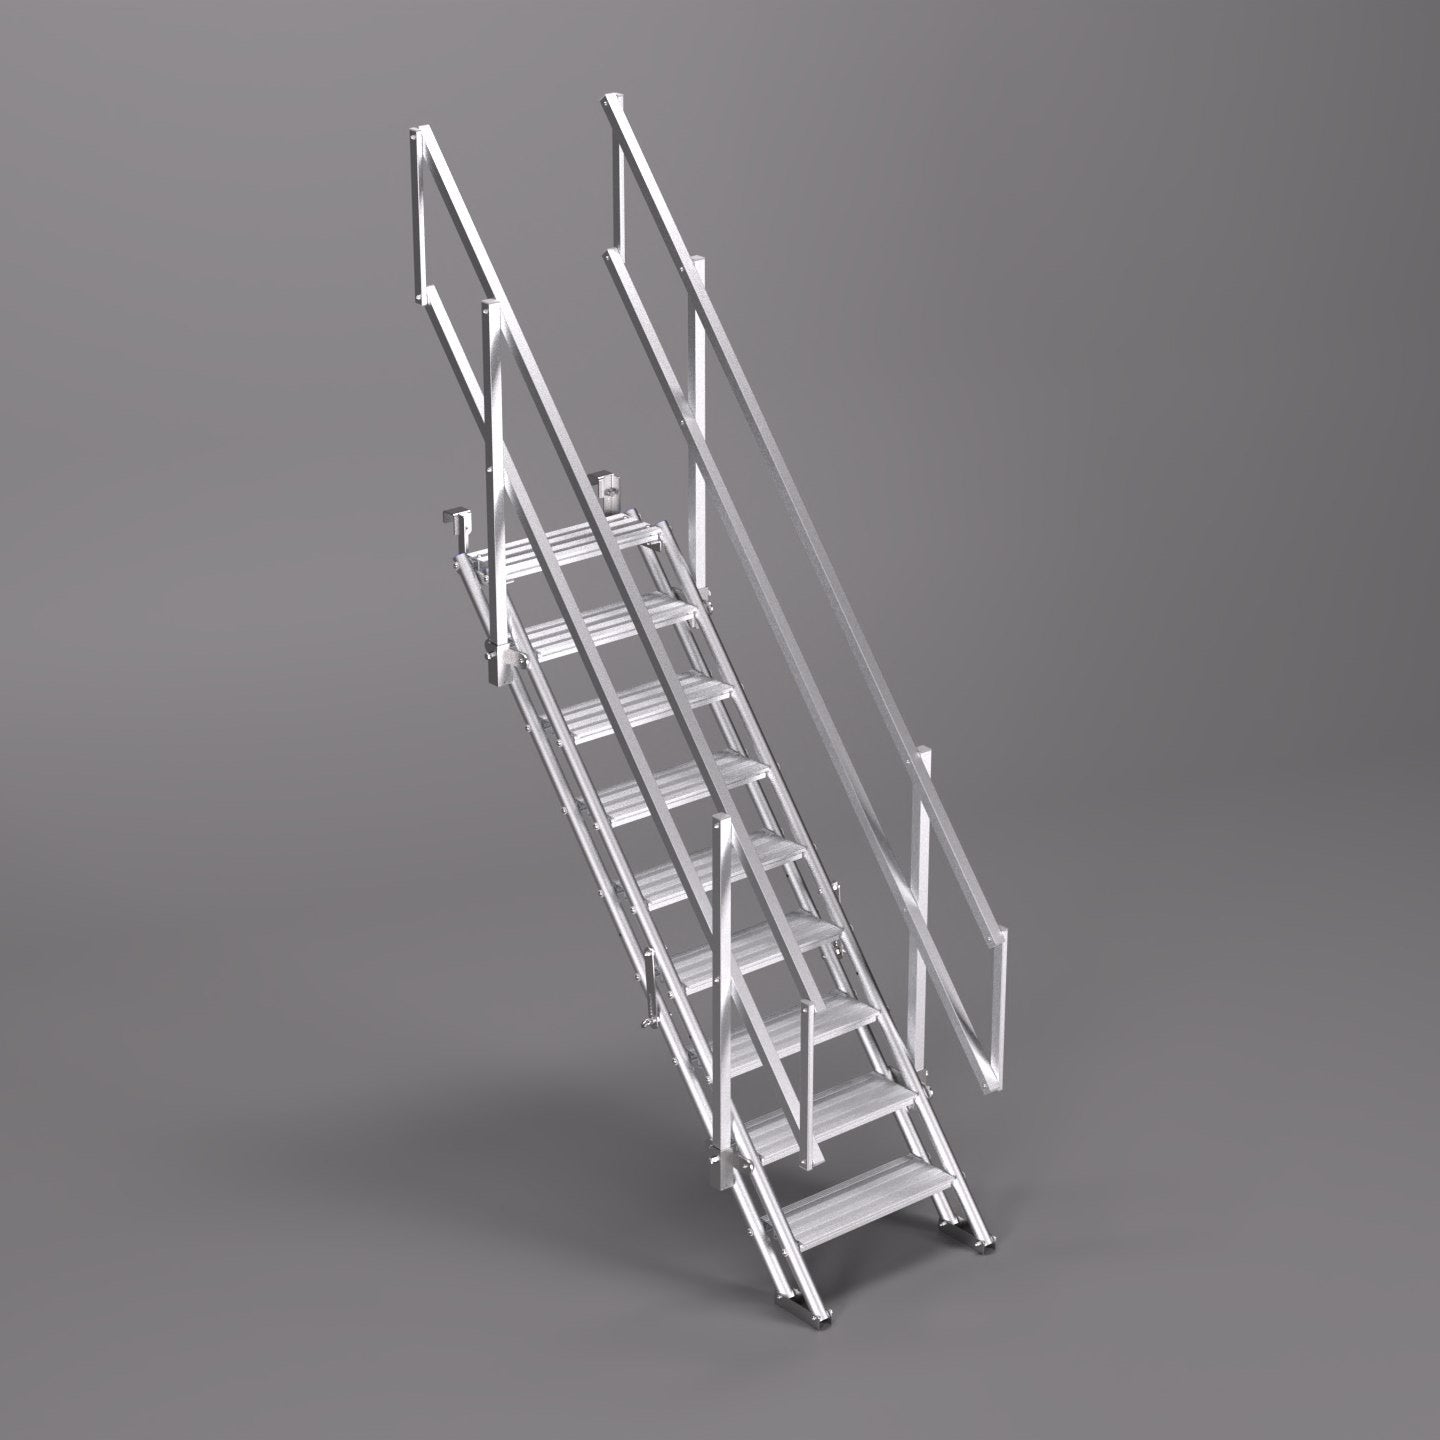 A 2m Alto Universal Stair unit with handrails.